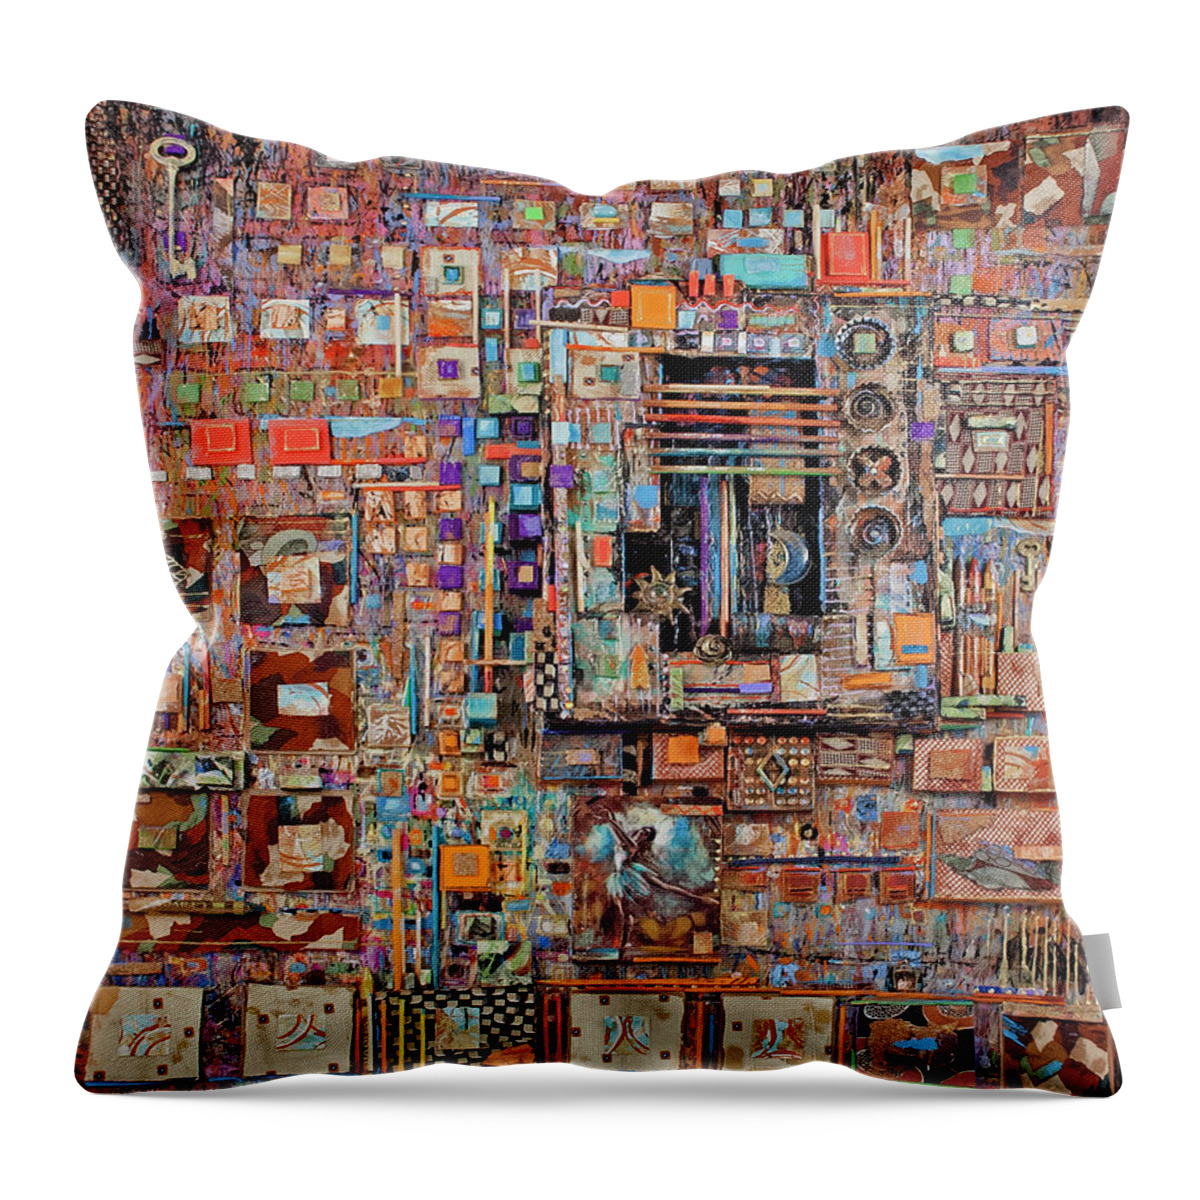 Abstract Throw Pillow featuring the mixed media Seeking by Marjorie Sarnat